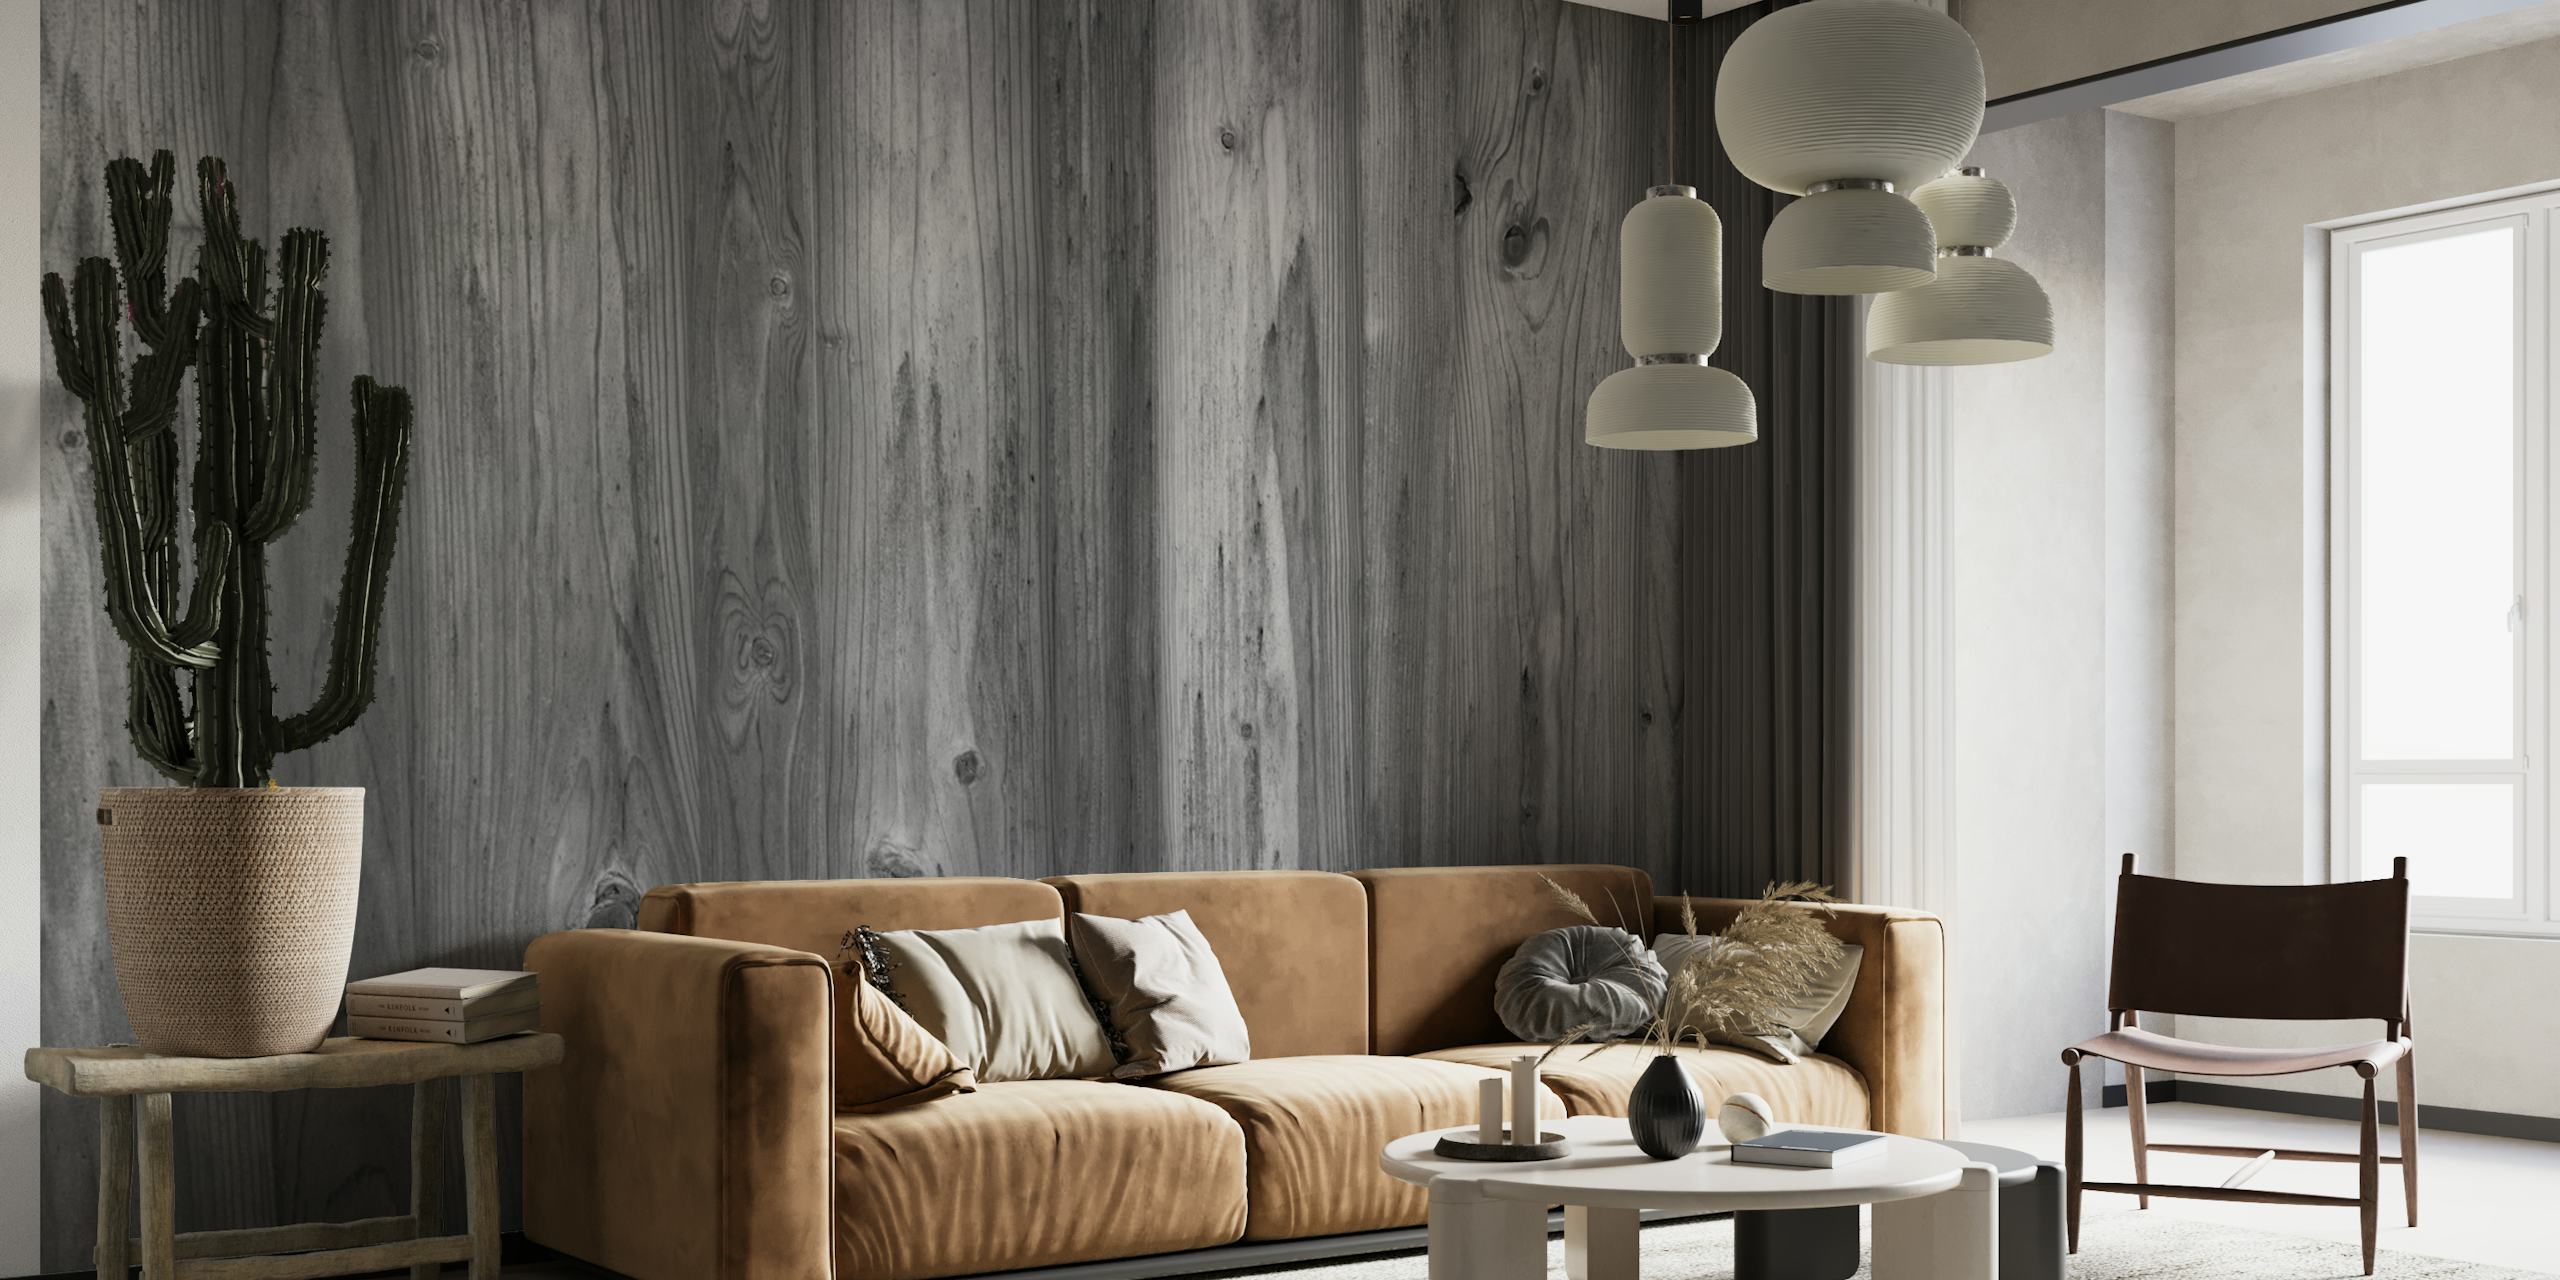 Rustic wood texture wall mural depicting detailed wooden planks